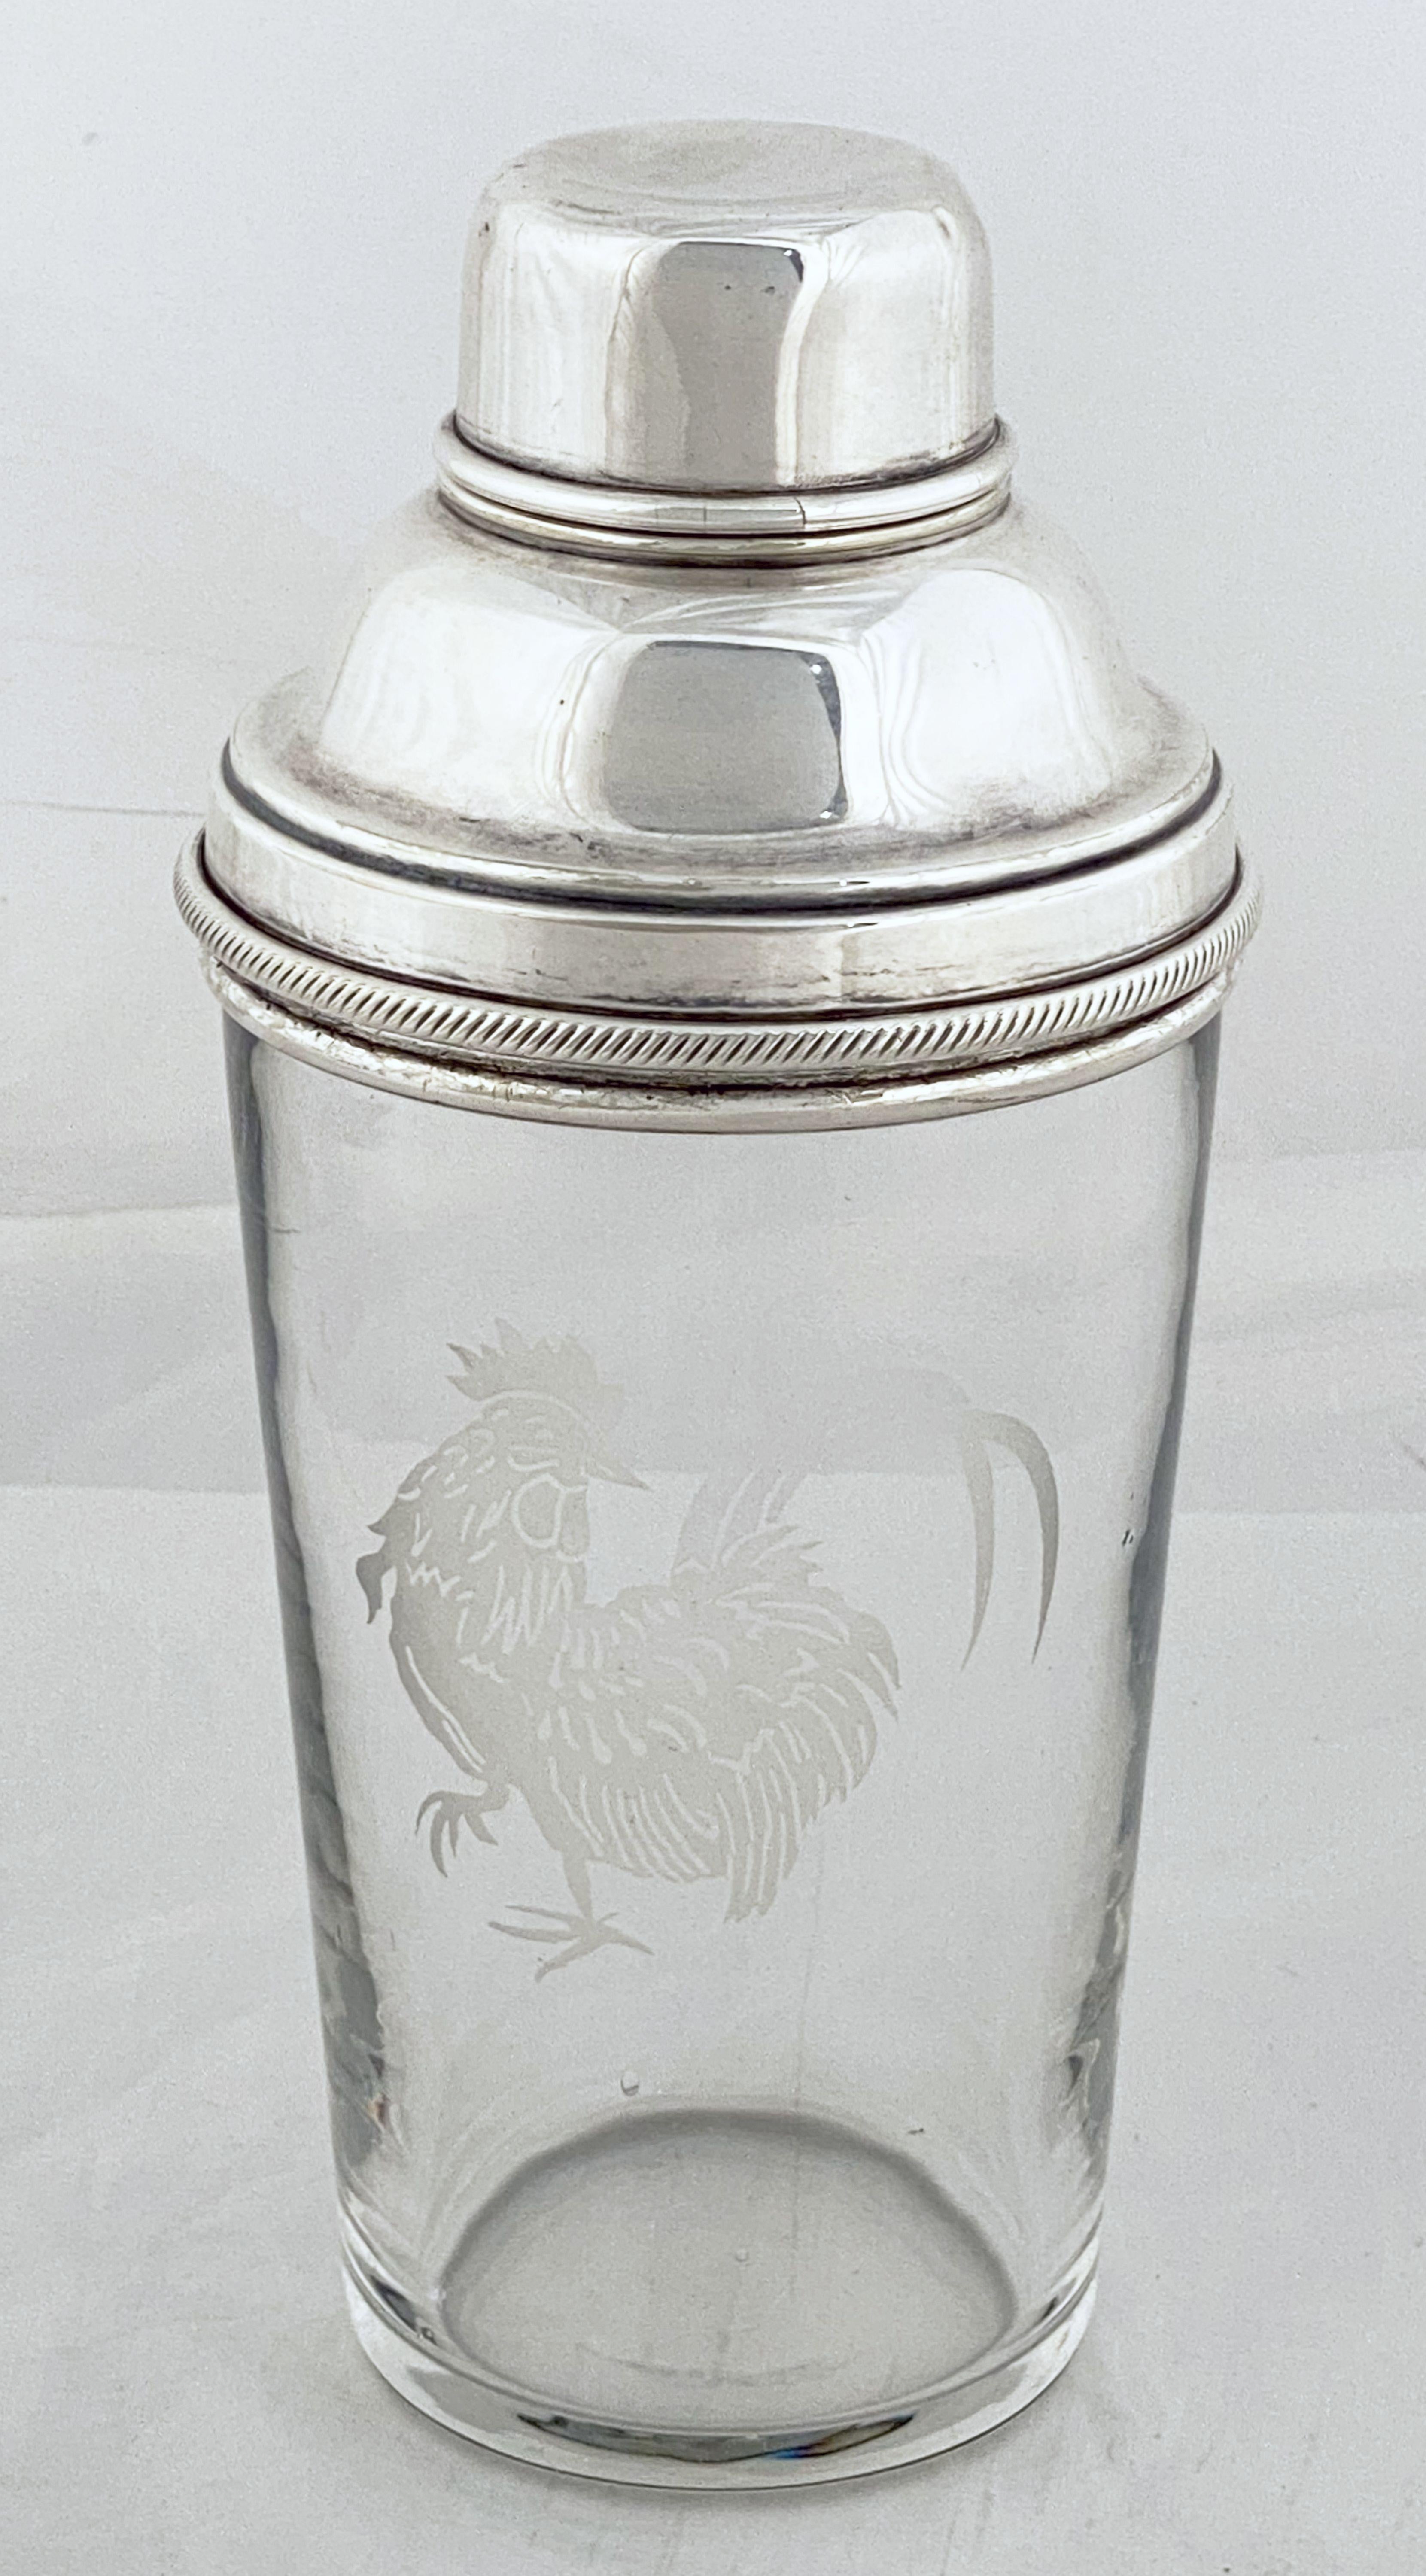 A large vintage English cocktail drinks or martini shaker of glass with removable cap and strainer of fine plate silver, 1 pint, featuring an etched cockerel on a cylindrical body.

Marked inside of cap: James Dixon and Sons hallmark, Made in